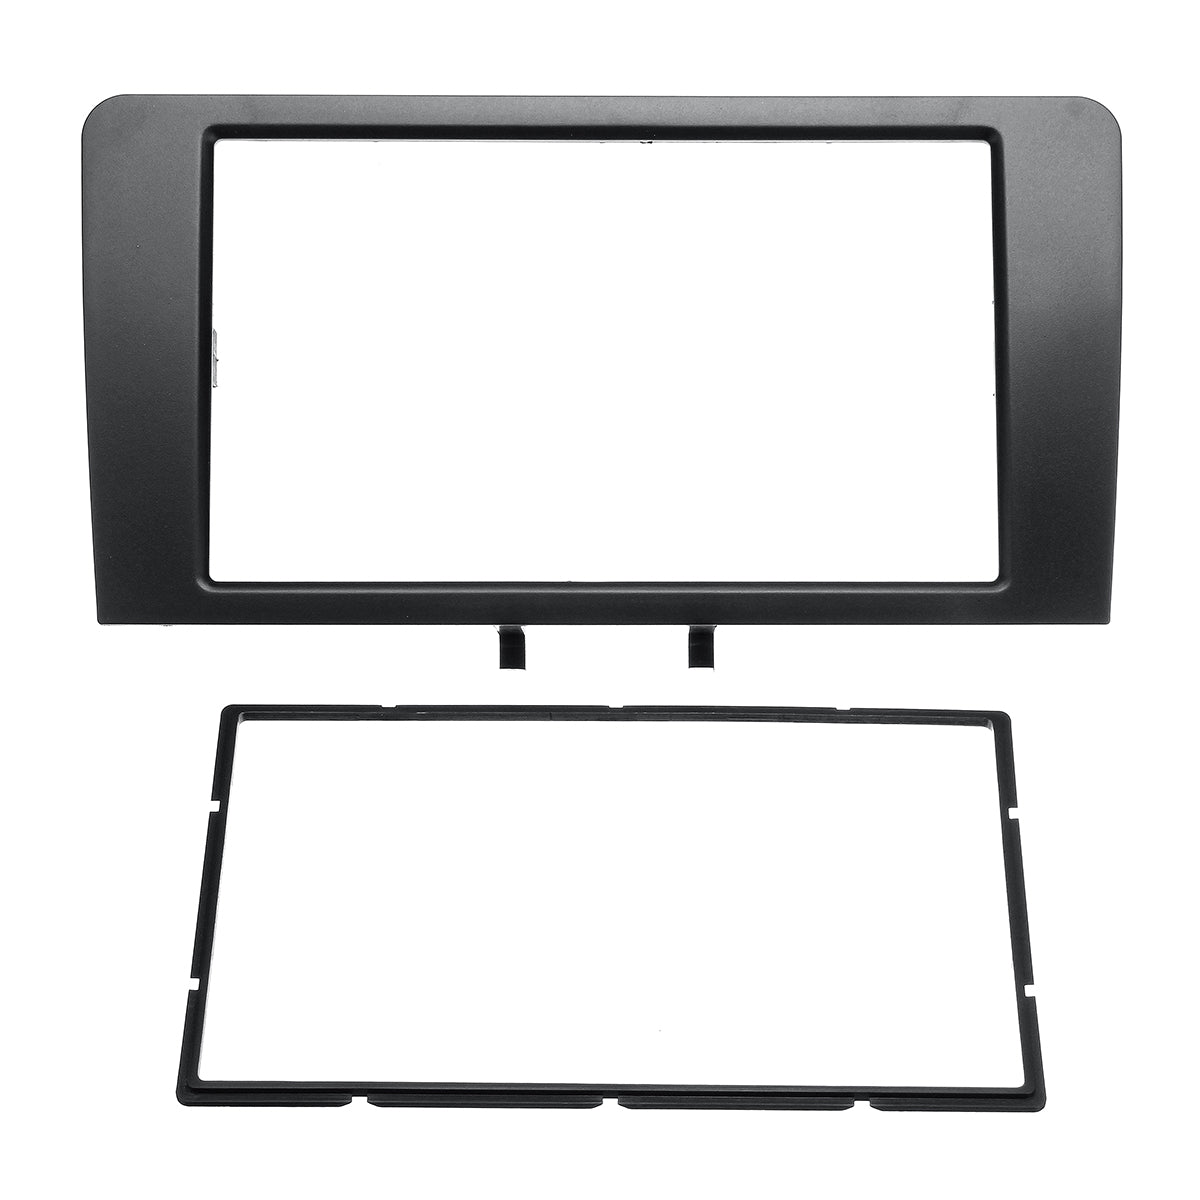 2DIN Car Radio Stereo Fascia Panel Plate Adapter For Audi A3 8P Model 2003-2012 - Auto GoShop